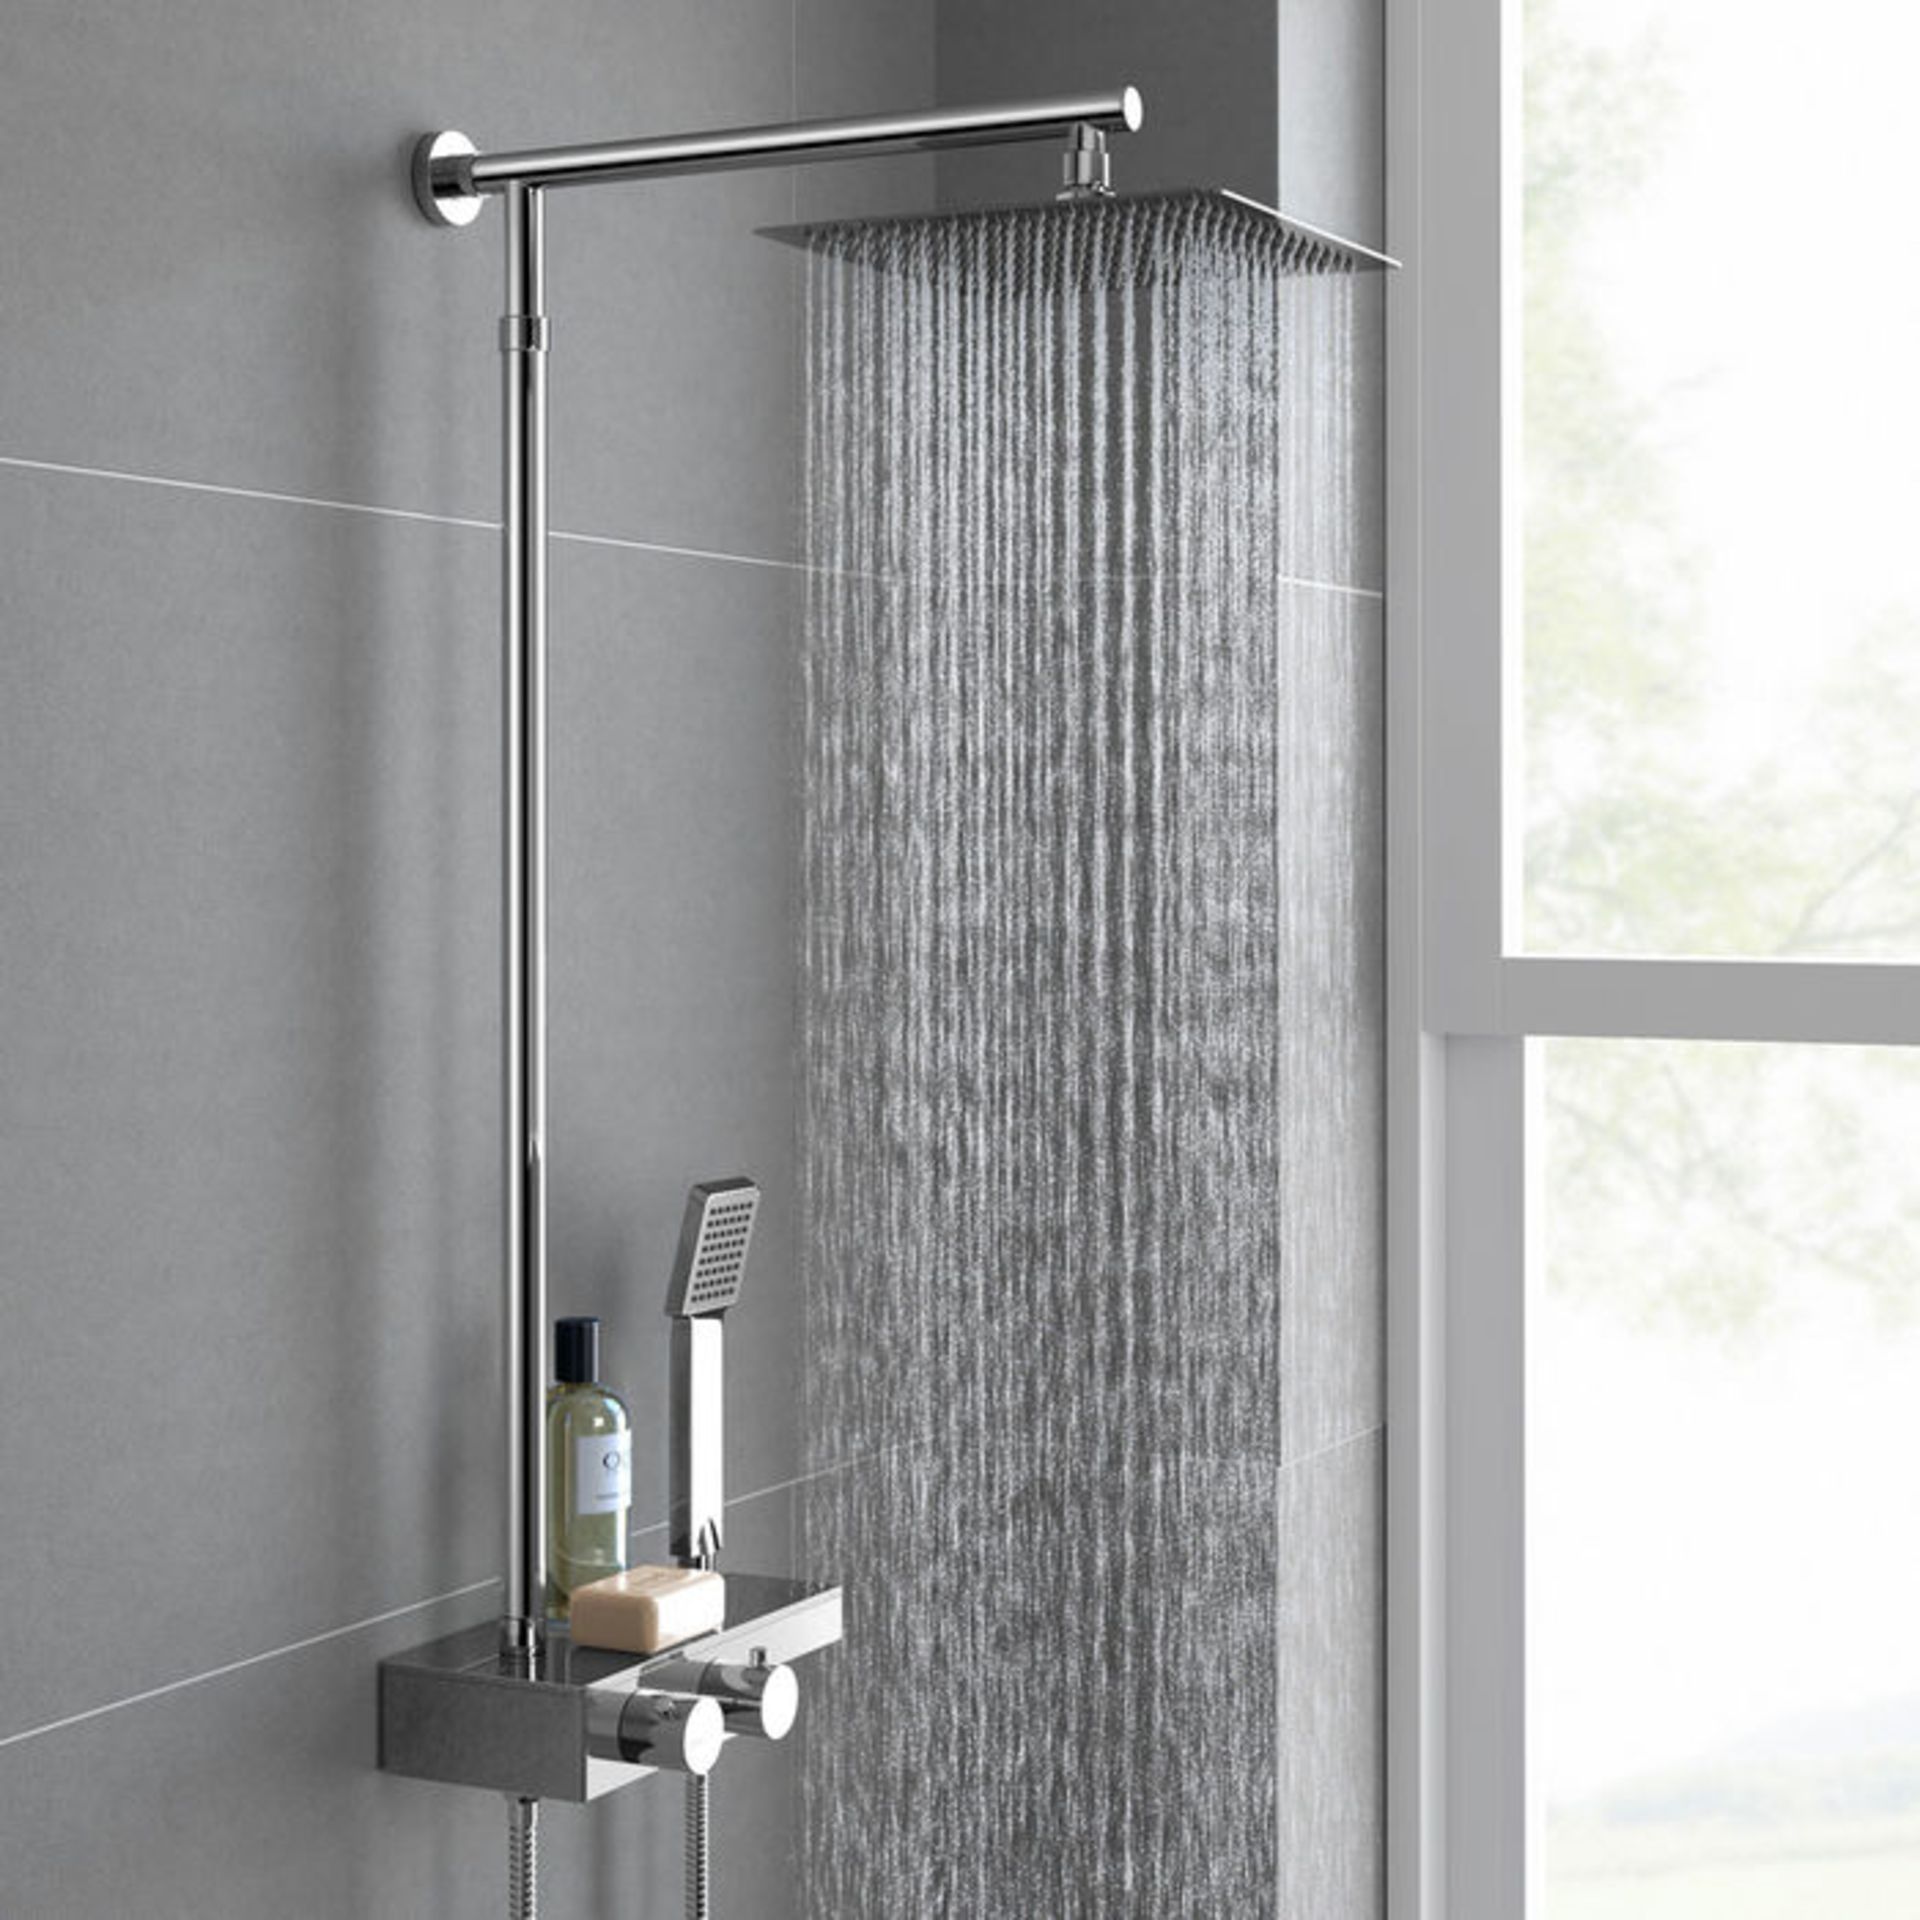 (P312) Square Exposed Thermostatic Shower Shelf, Kit & Large Head. Style meets function with our